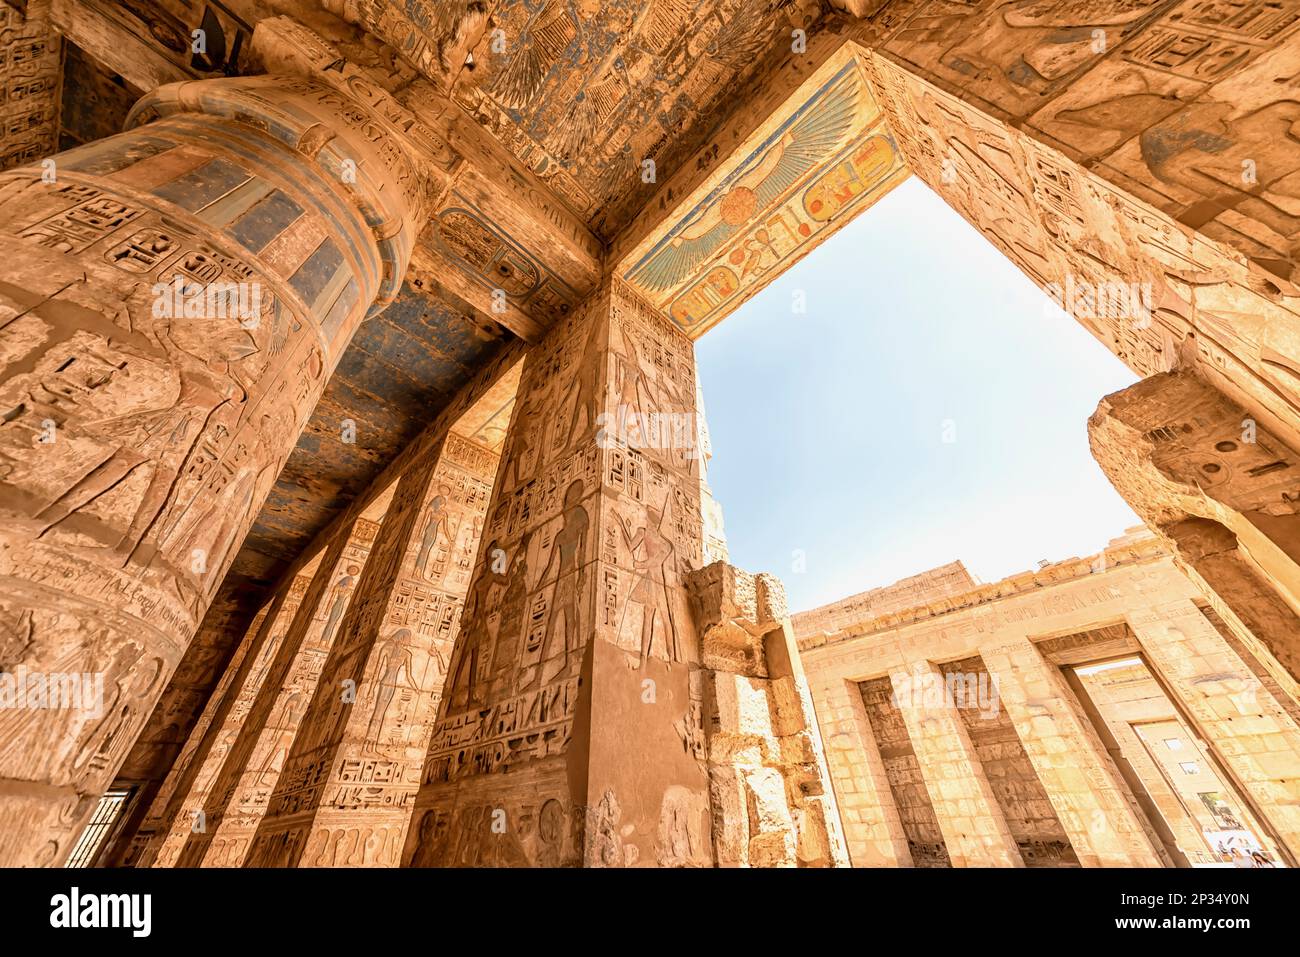 The Temple of Ramesses III in Luxor, Egypt Stock Photo